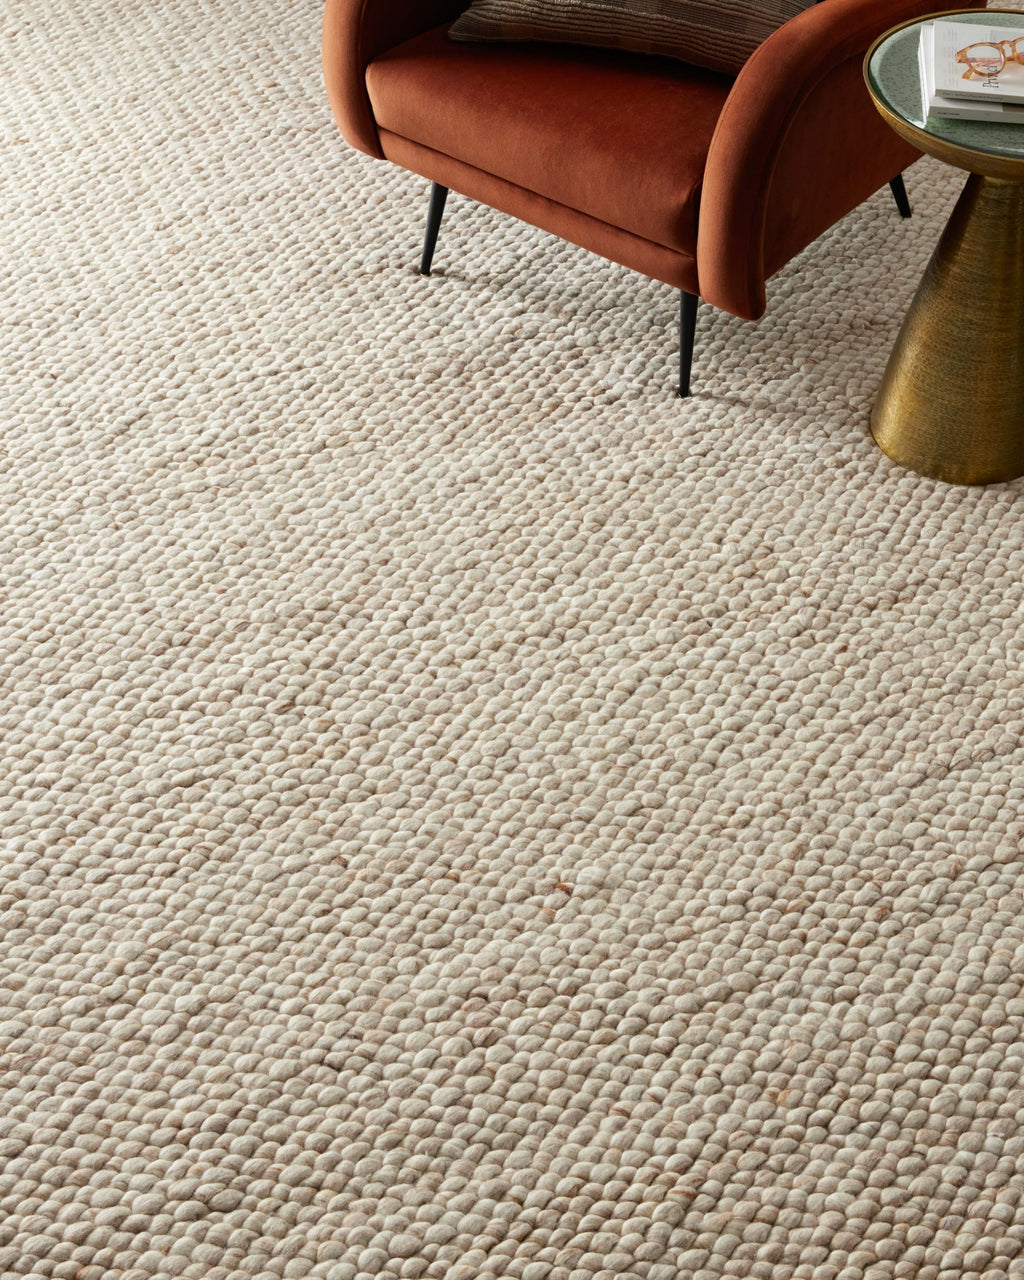 Loloi Hendrick HEN-01 Natural Area Rug by Jean Stoffer x Lifestyle Image Feature